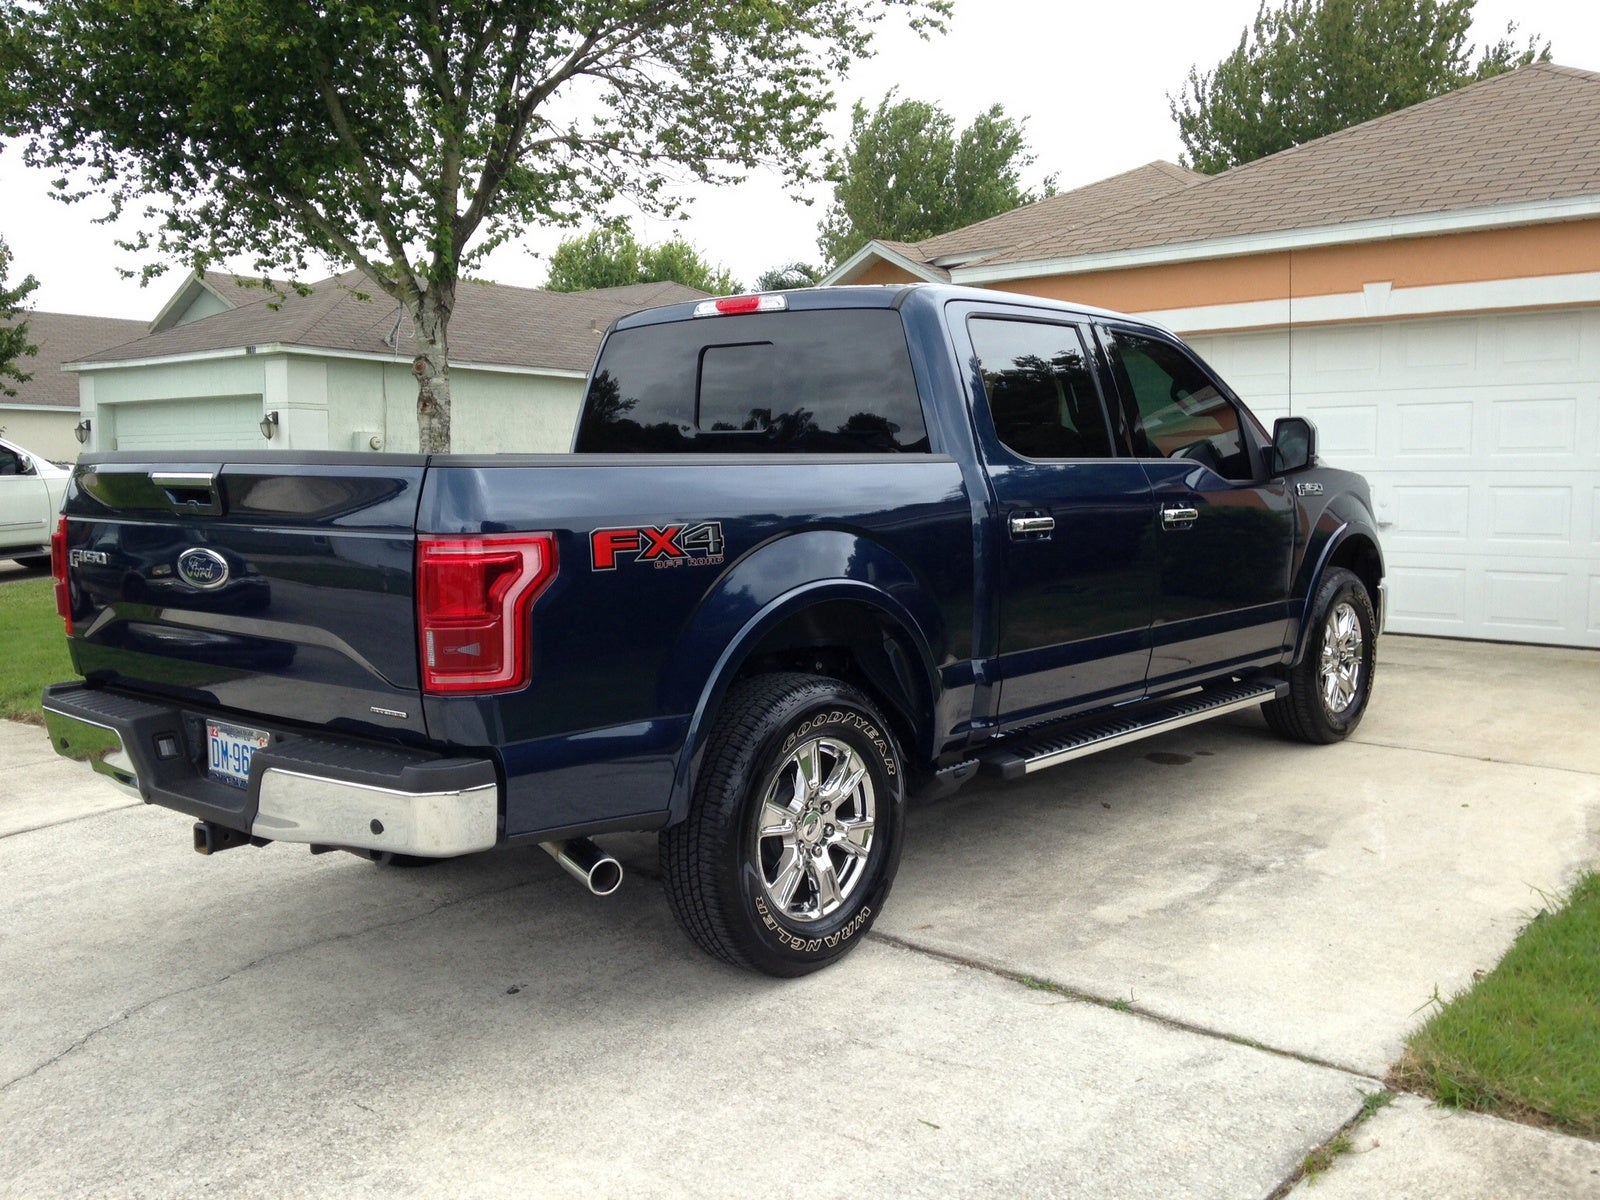 New 2015 2016 Ford F 150 For Sale Ford F150 Car 2016 Ford 